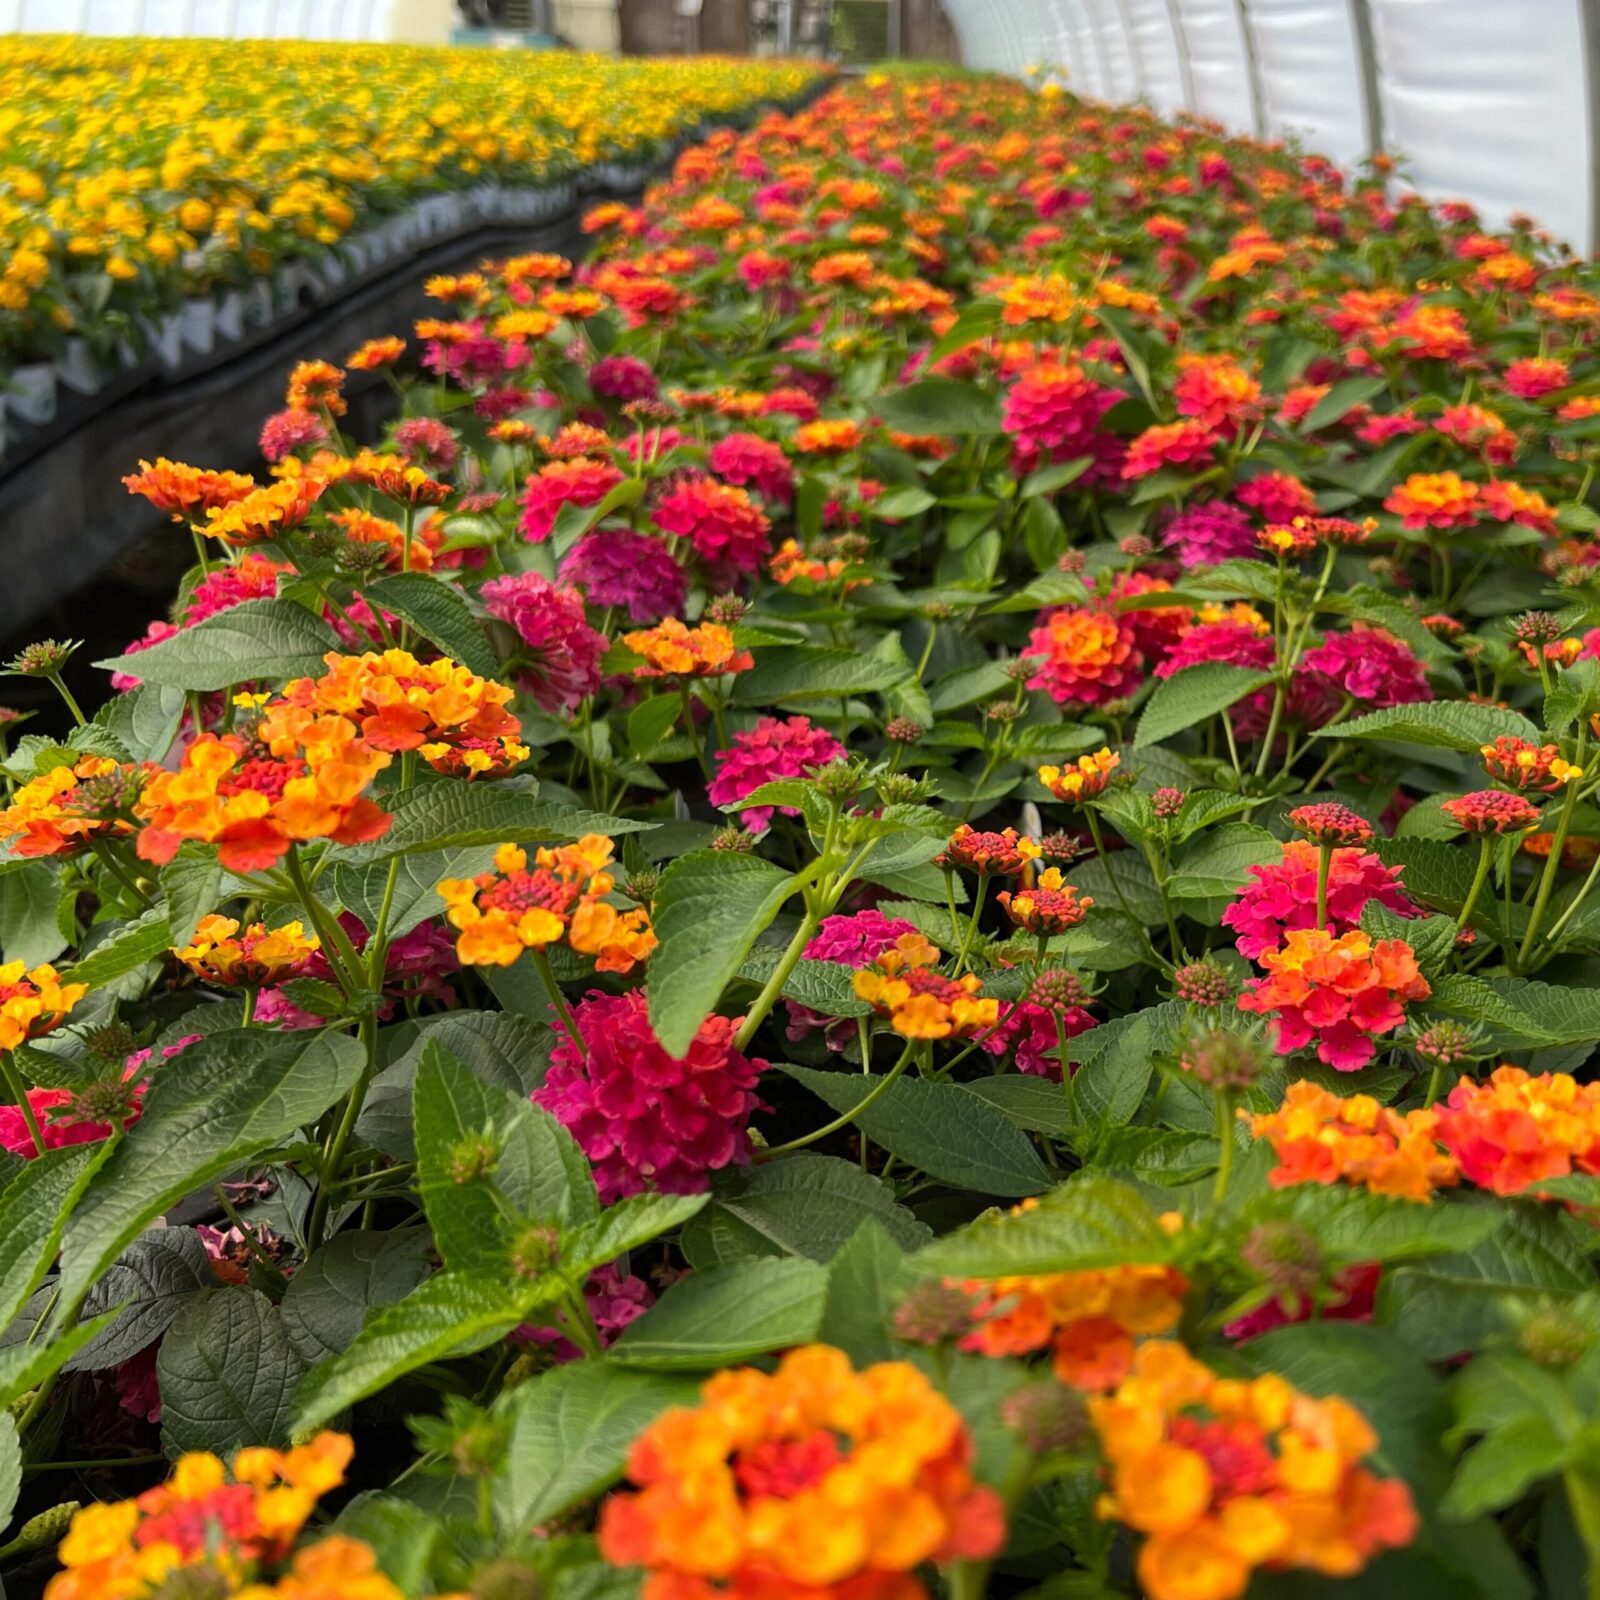 Greenstreet Growers Wholesale Landscape Supply Finished Production Plants Annual Lantana Red Yellow Orange